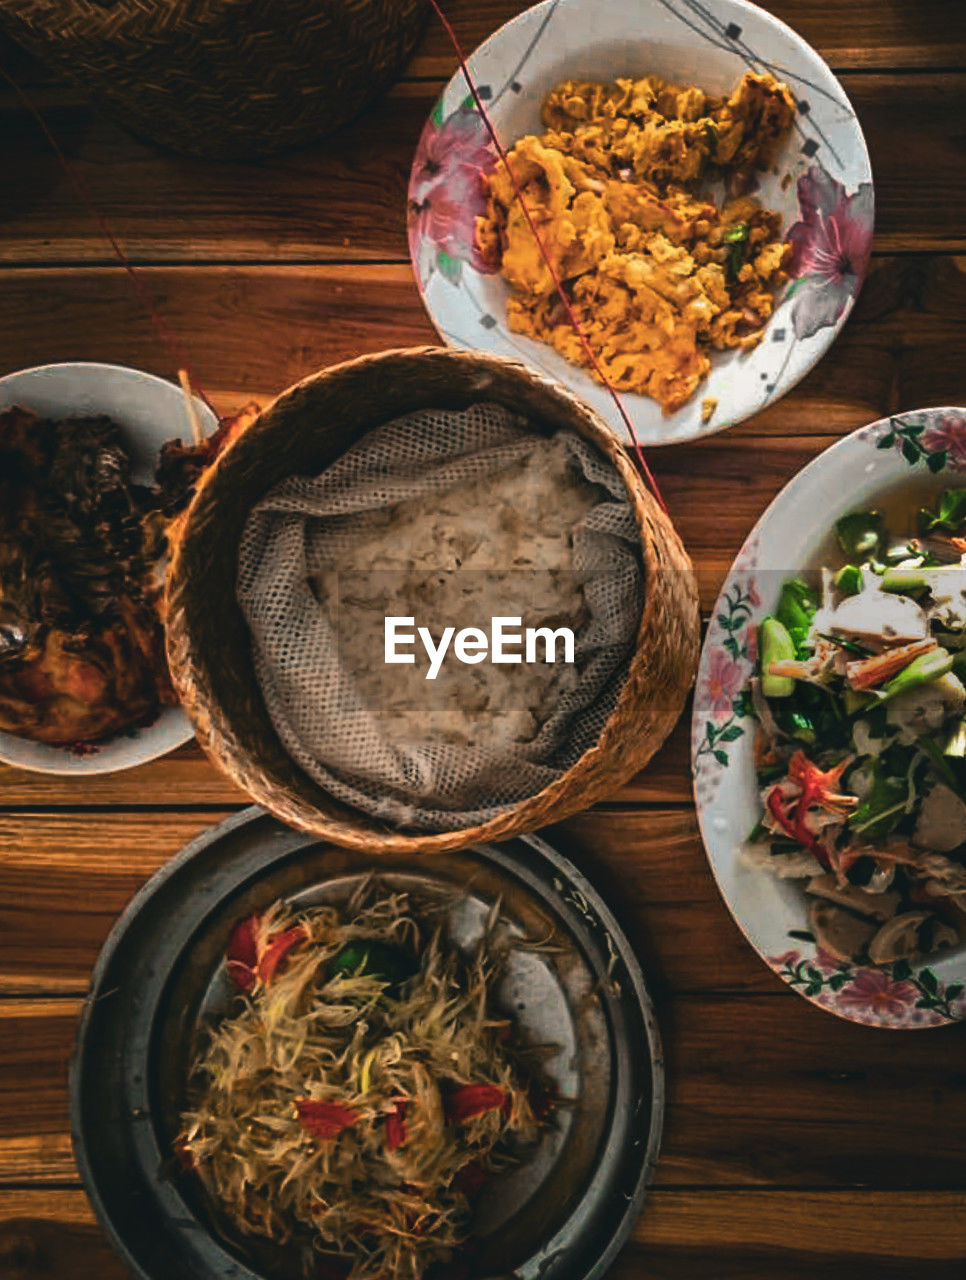 food and drink, food, healthy eating, wellbeing, bowl, freshness, vegetable, directly above, table, asian food, high angle view, no people, spice, indoors, dish, meal, wood, plate, still life, ingredient, variation, meat, rice - food staple, chinese food, crockery, cuisine, pepper